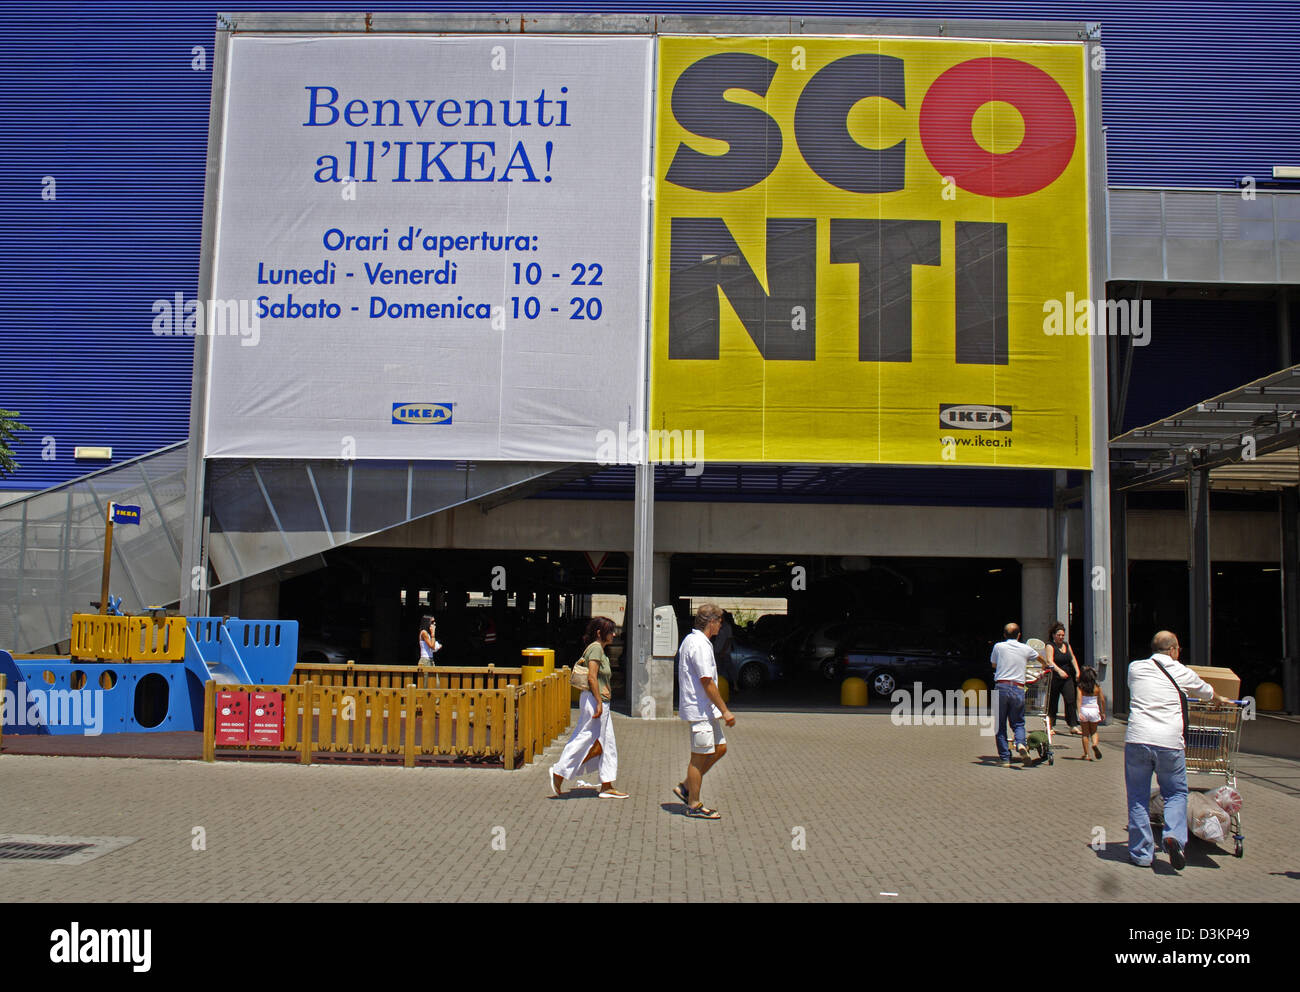 Ikea Italy High Resolution Stock Photography and Images - Alamy